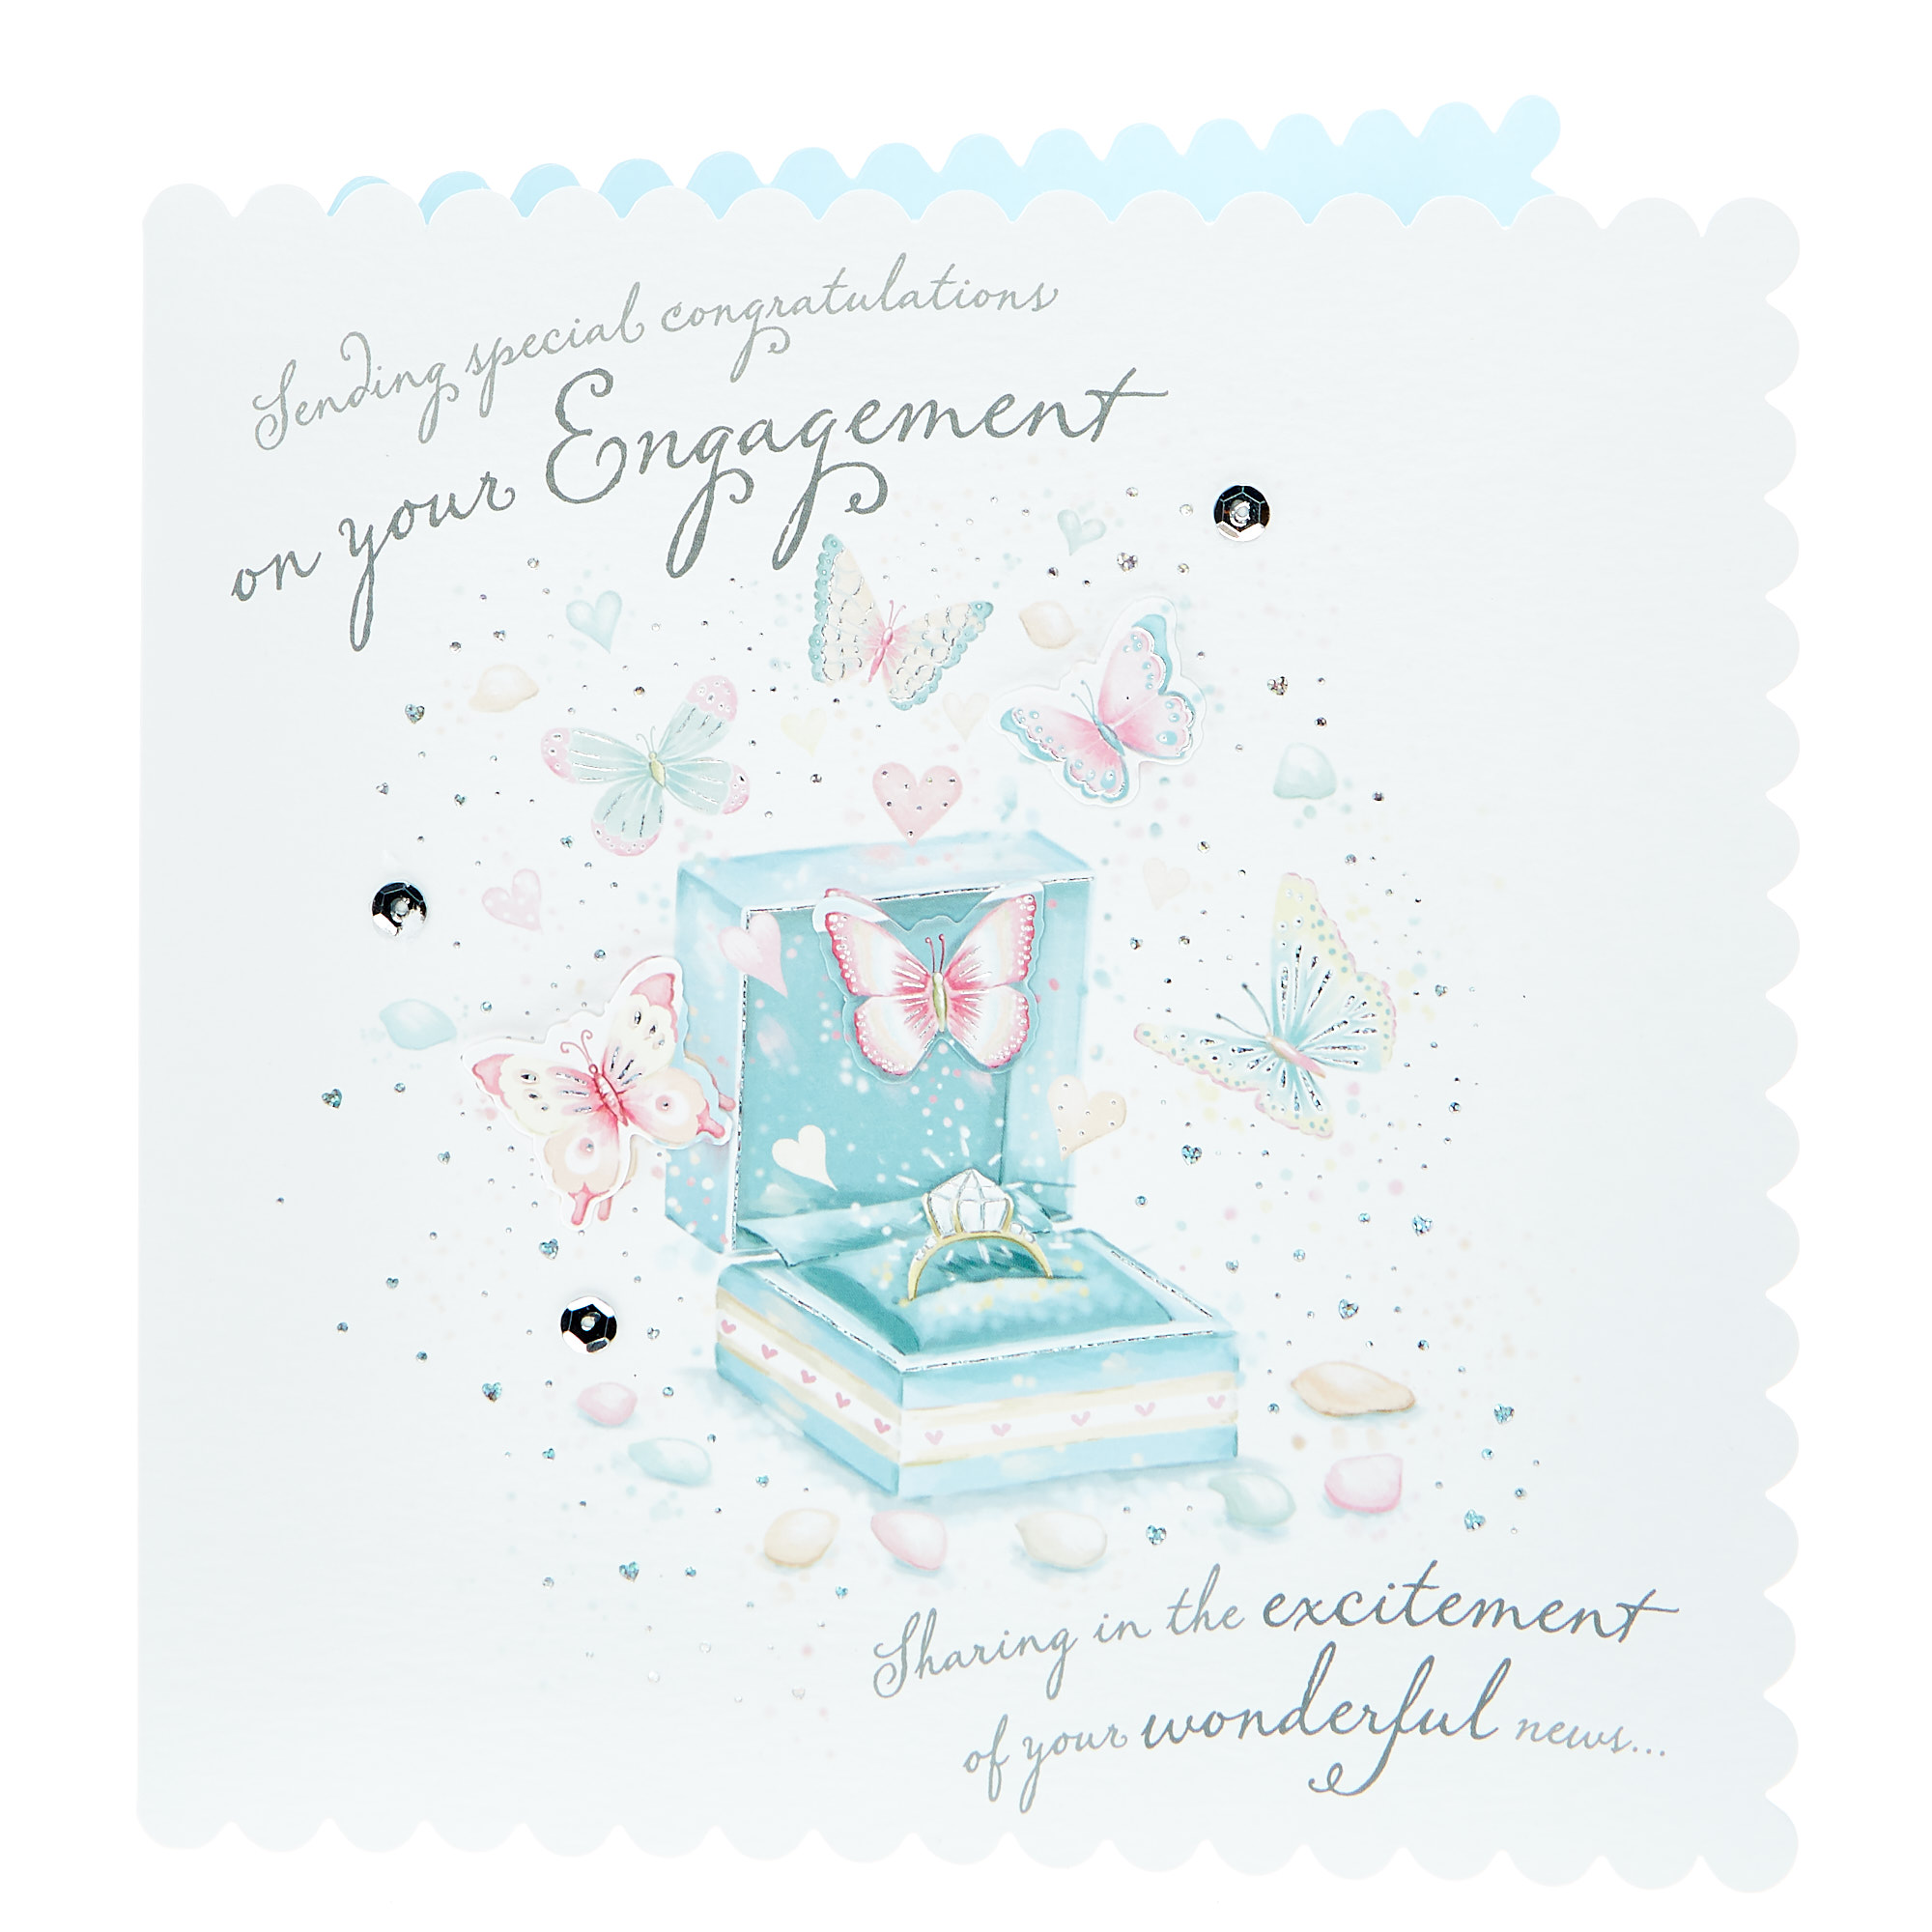 Exquisite Collection Engagement Card - Sending Special Congratulations